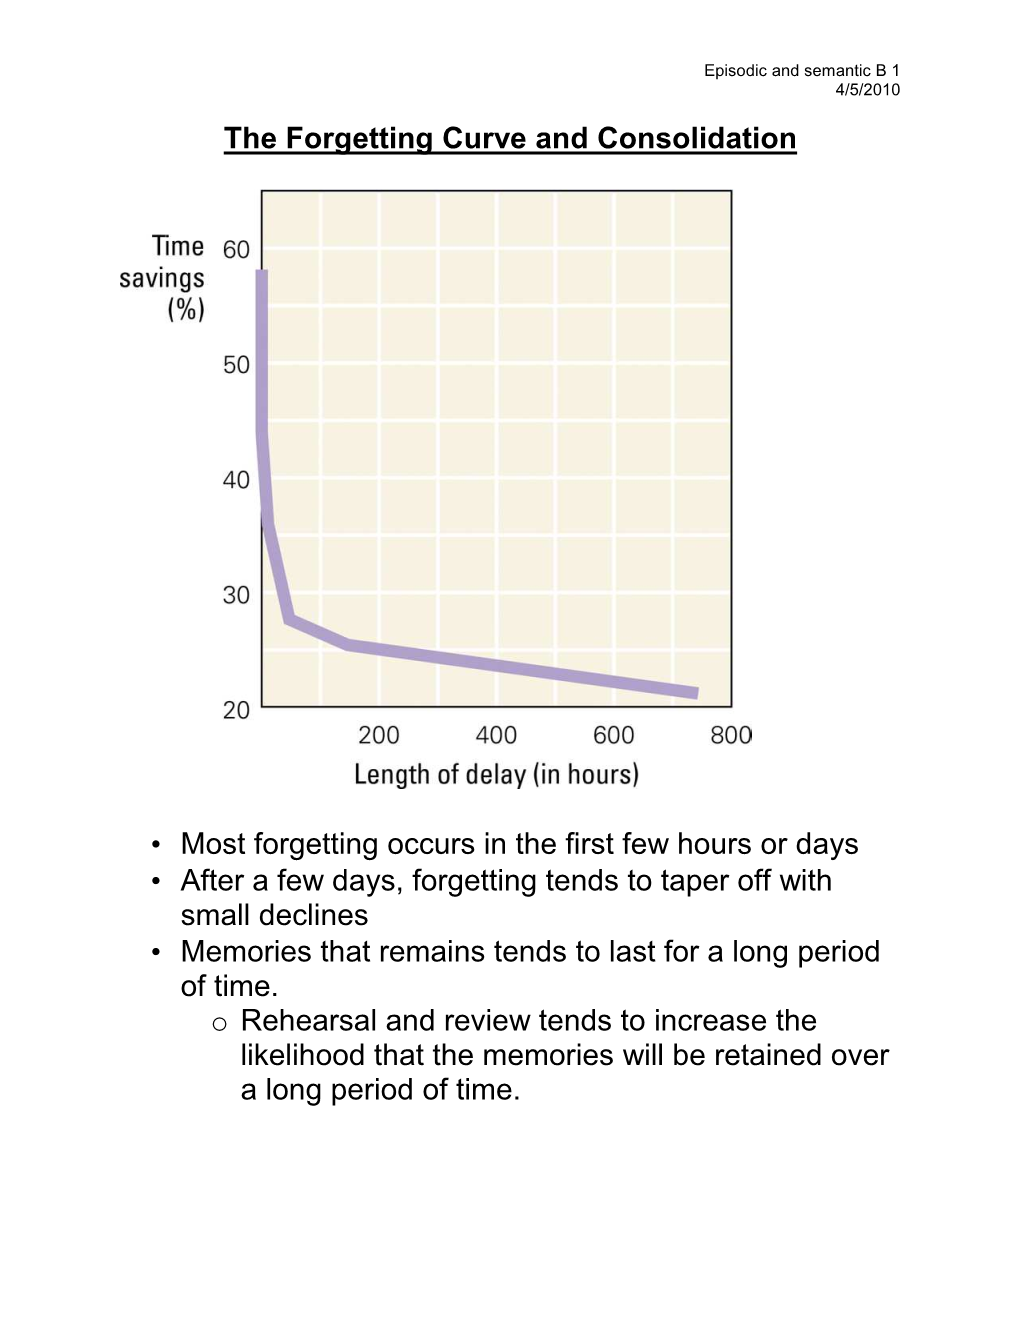 The Forgetting Curve and Consolidation